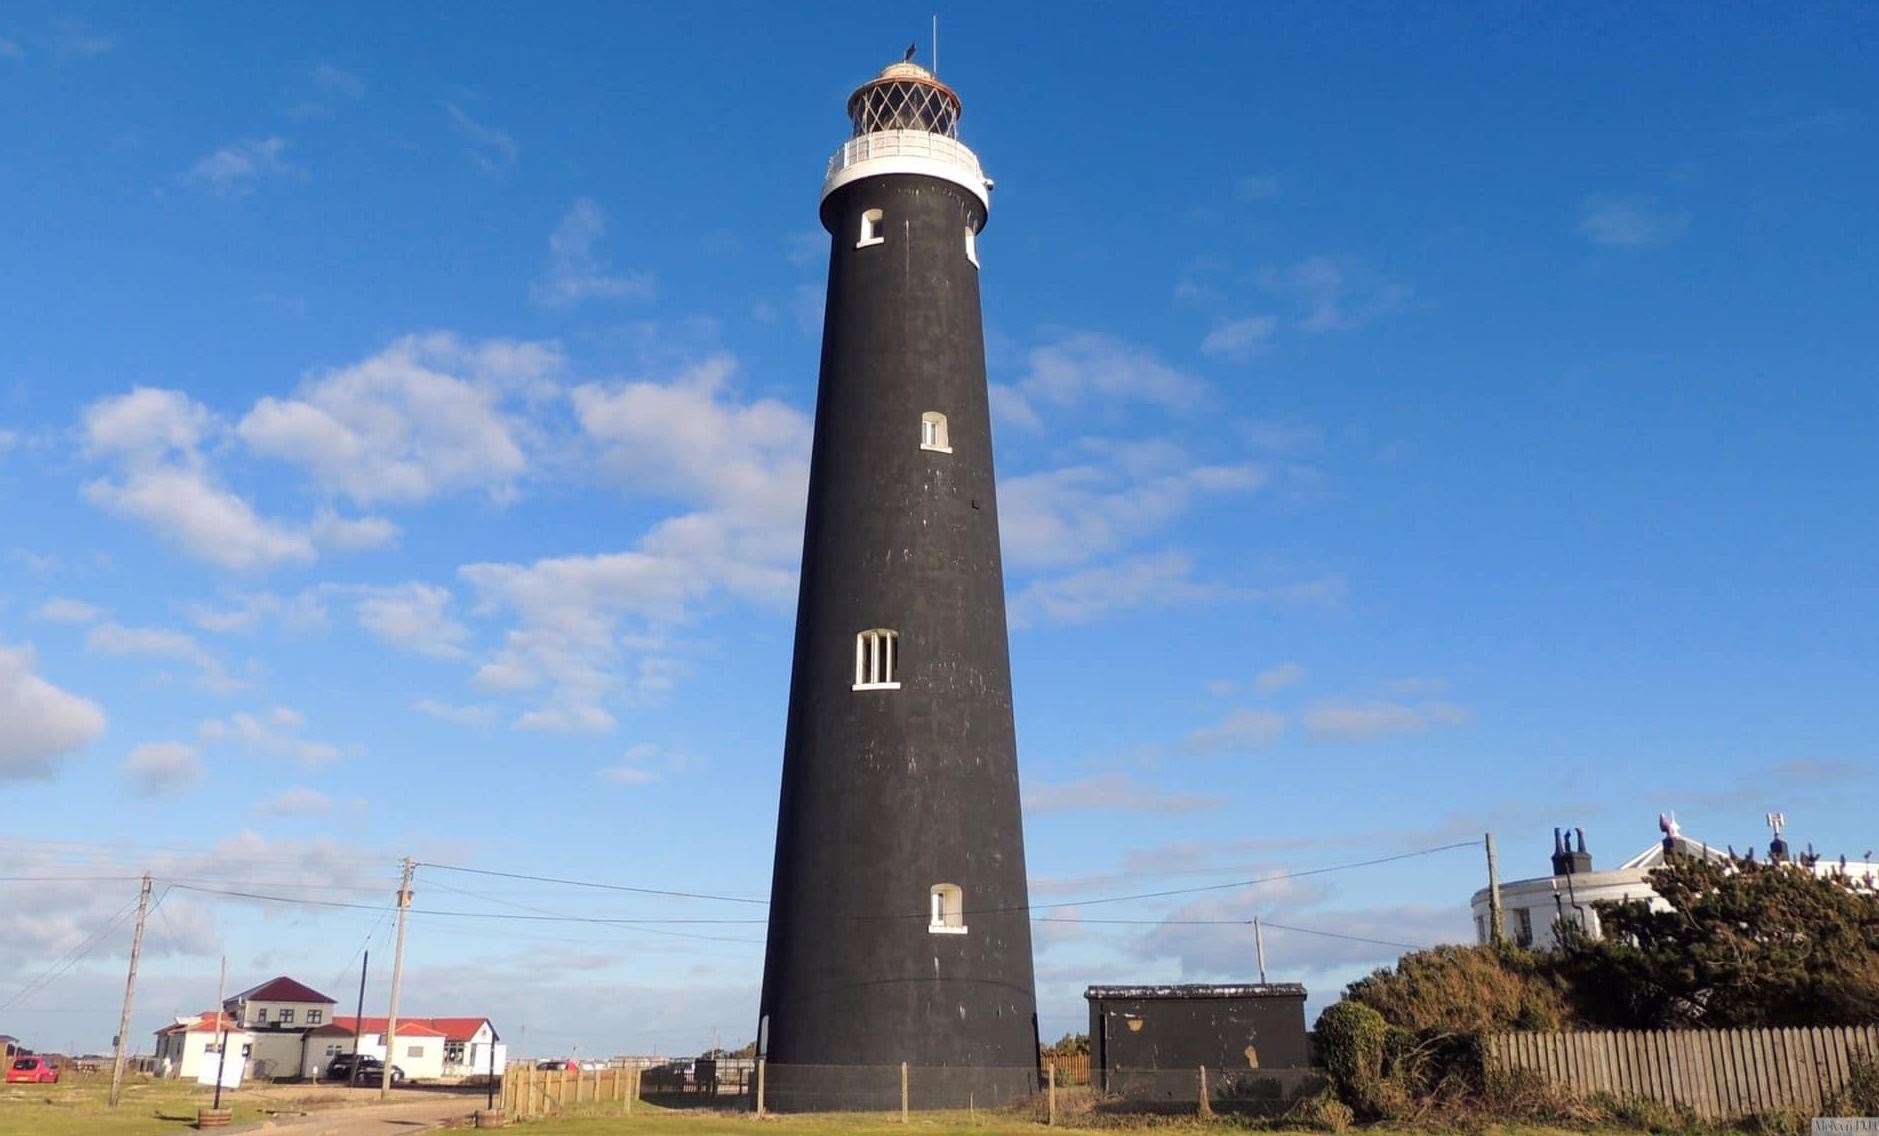 The lighthouse will be lit for the first time in more than 60 years. Picture: Brian Chappell